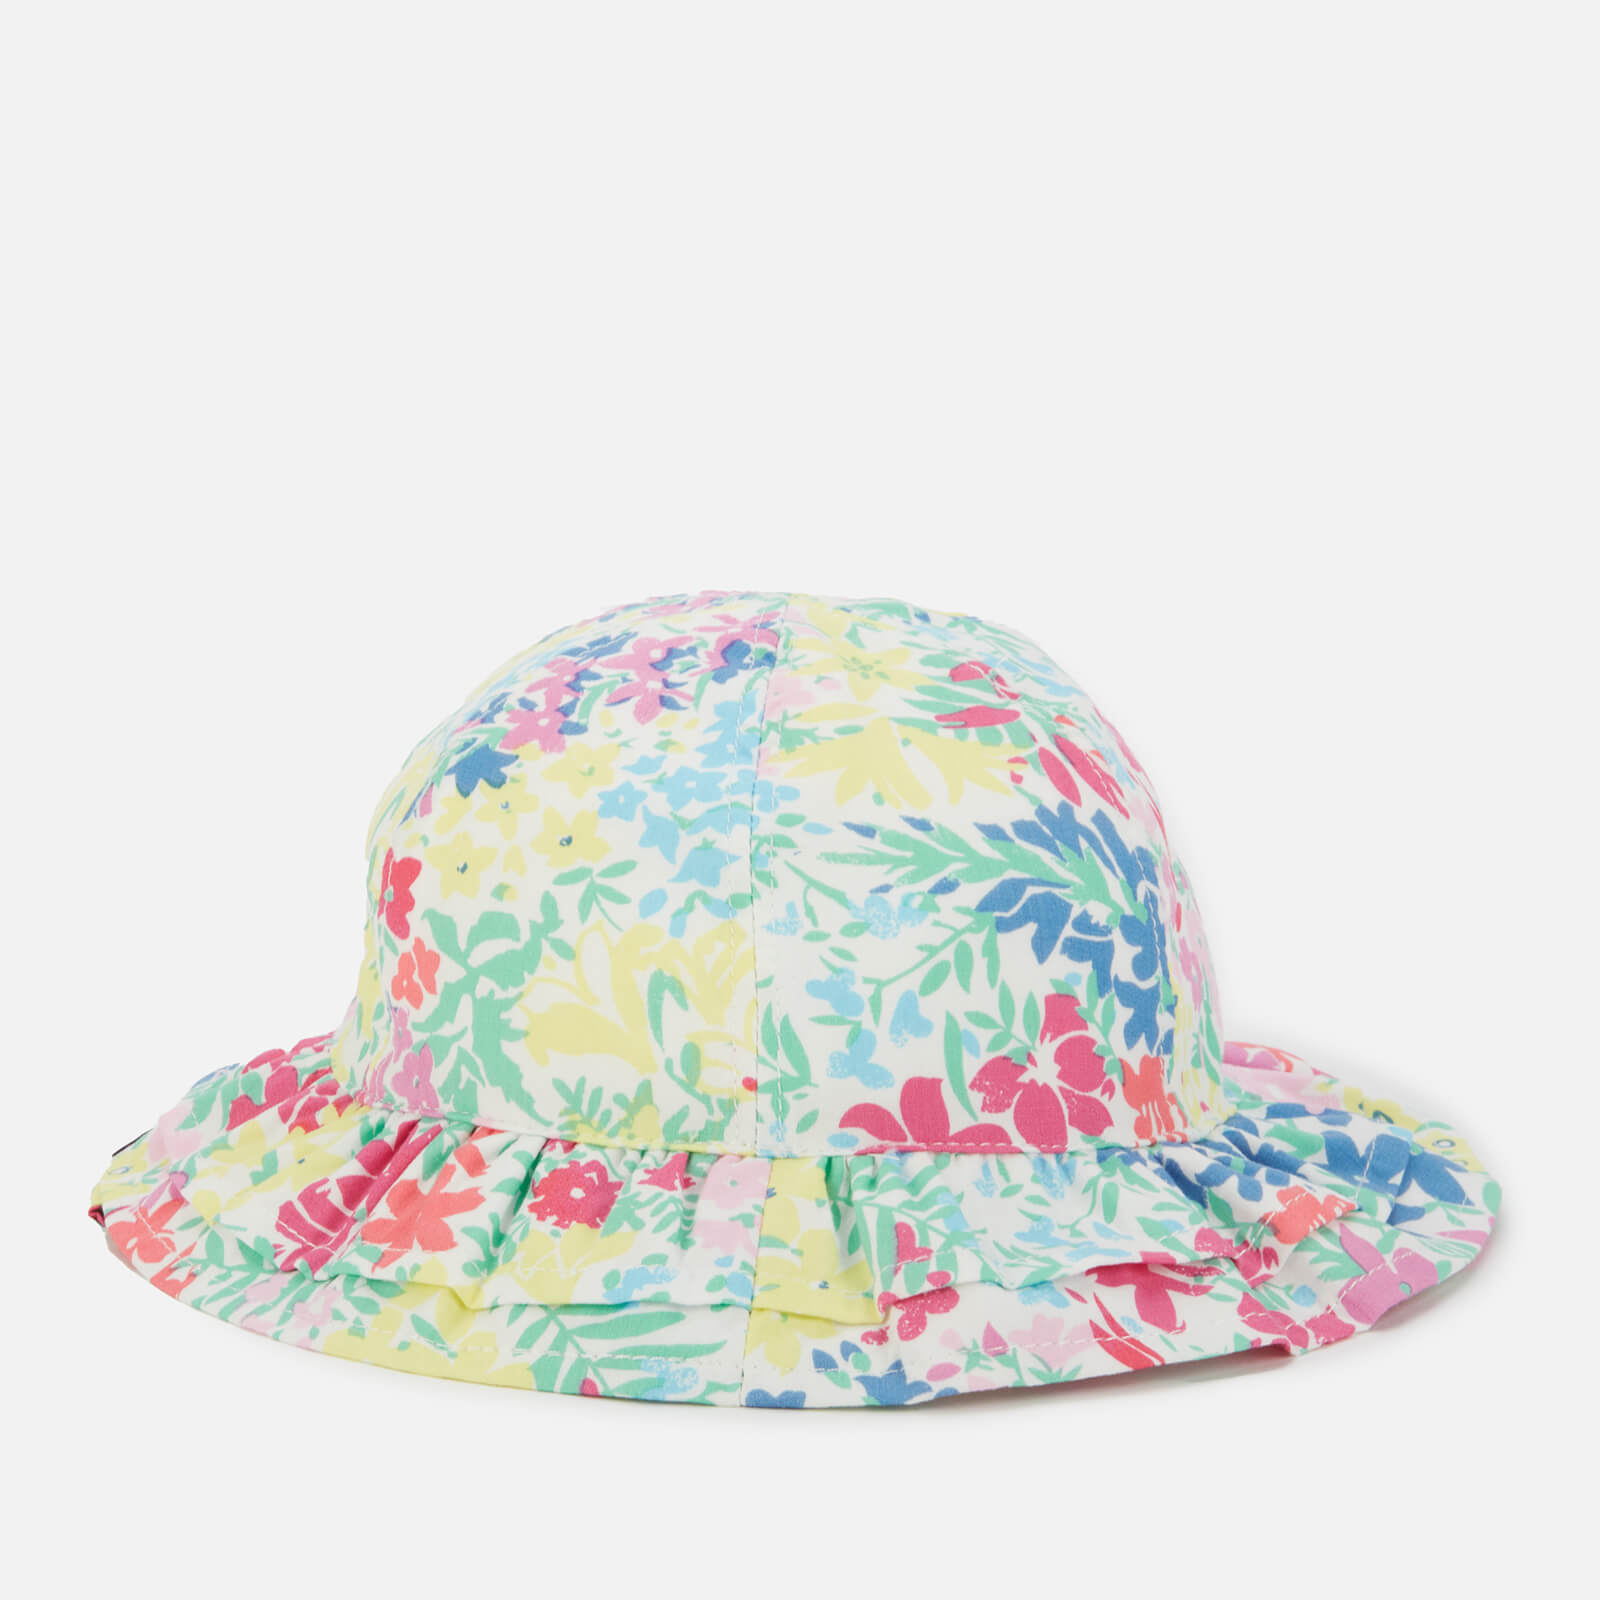 Joules Baby Buzzy Sun Hat - Floral White - 0-6 Months